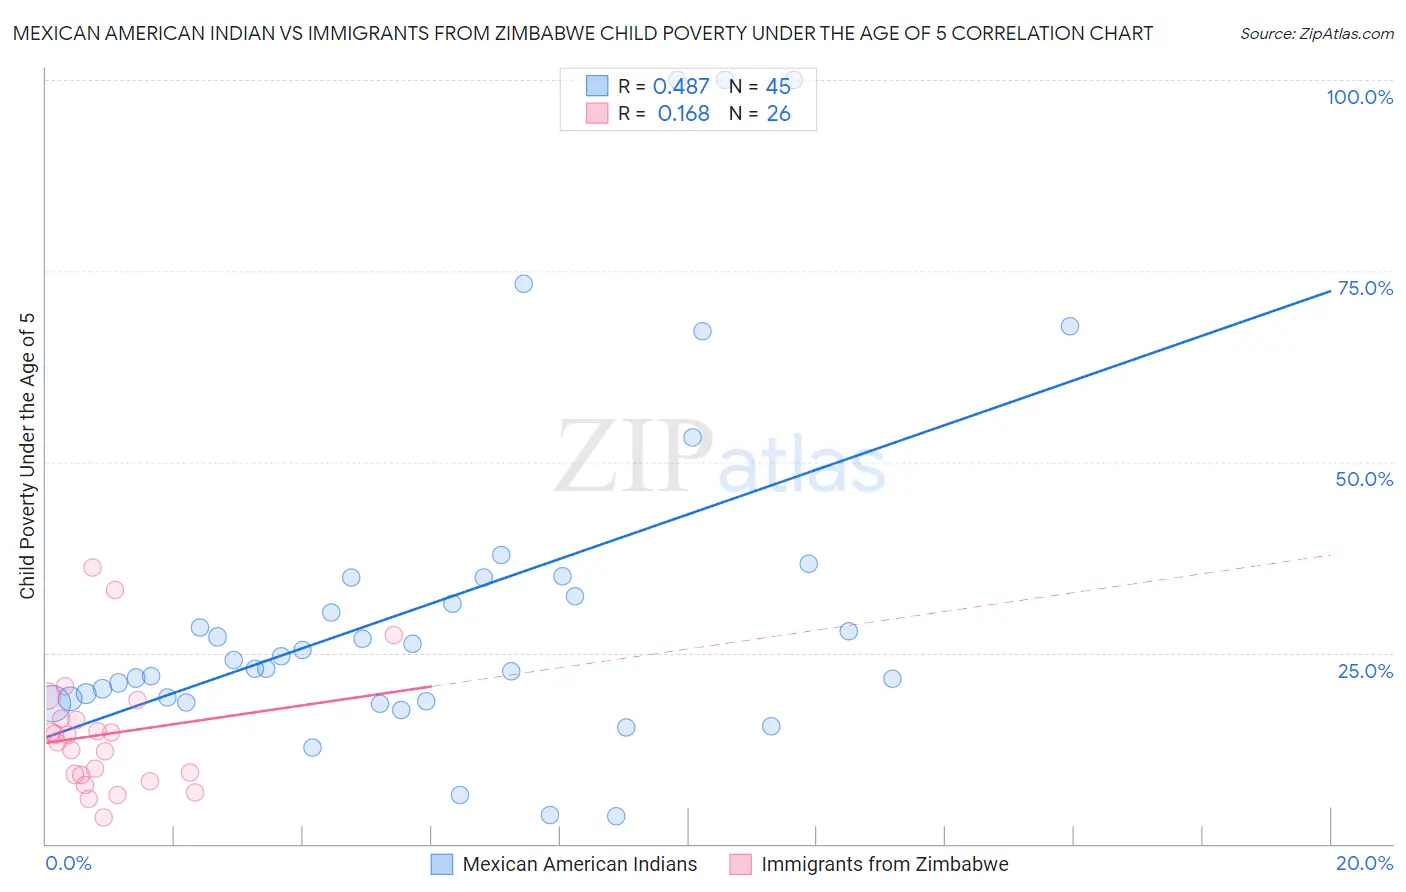 Mexican American Indian vs Immigrants from Zimbabwe Child Poverty Under the Age of 5